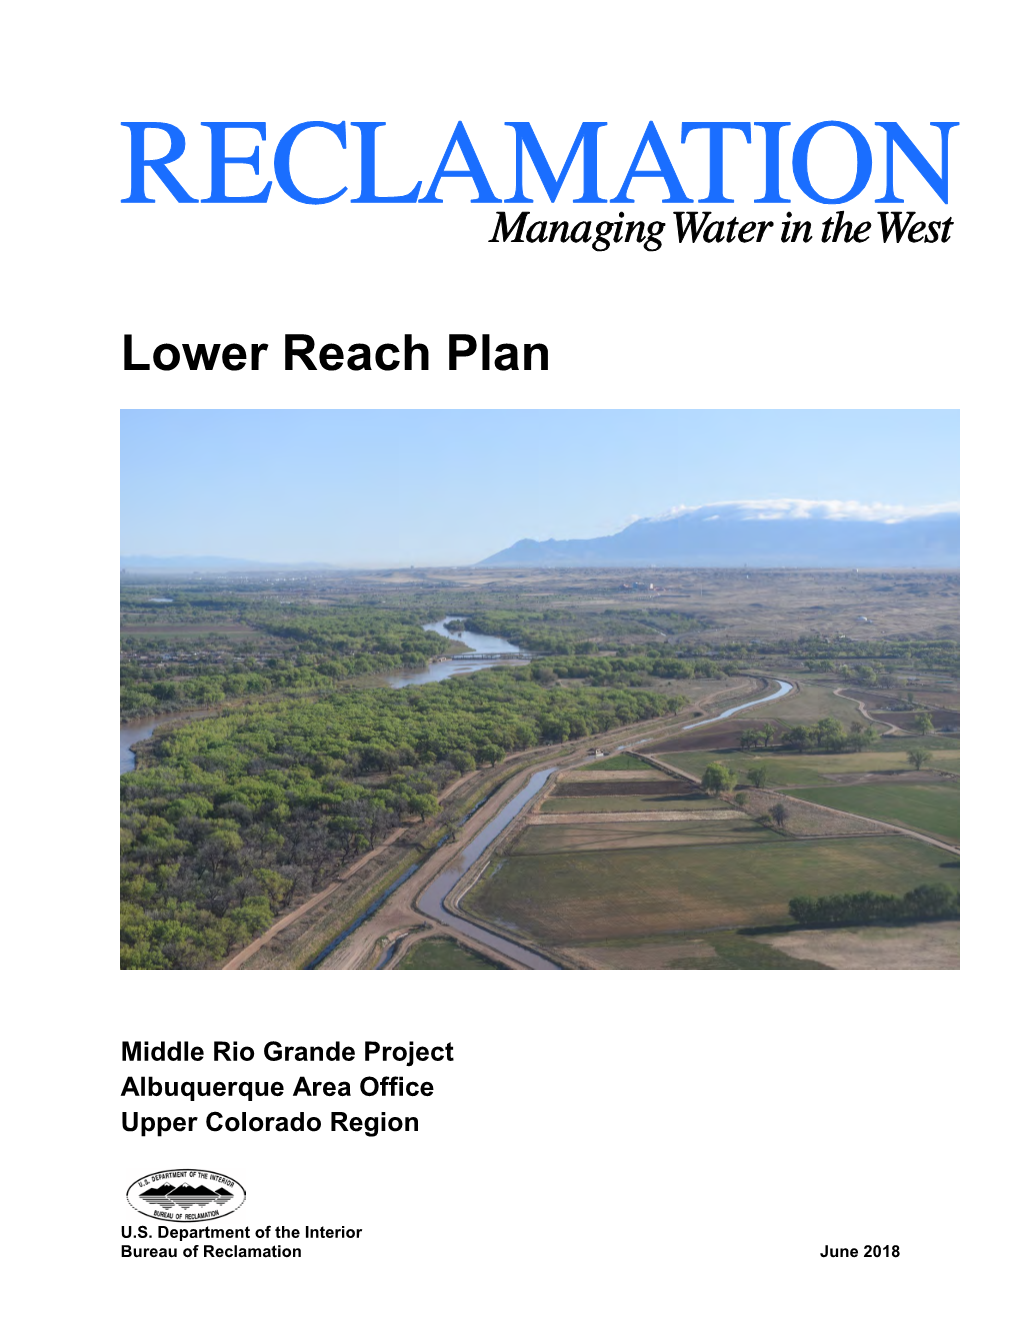 Lower Reach Plan for the Middle Rio Grande